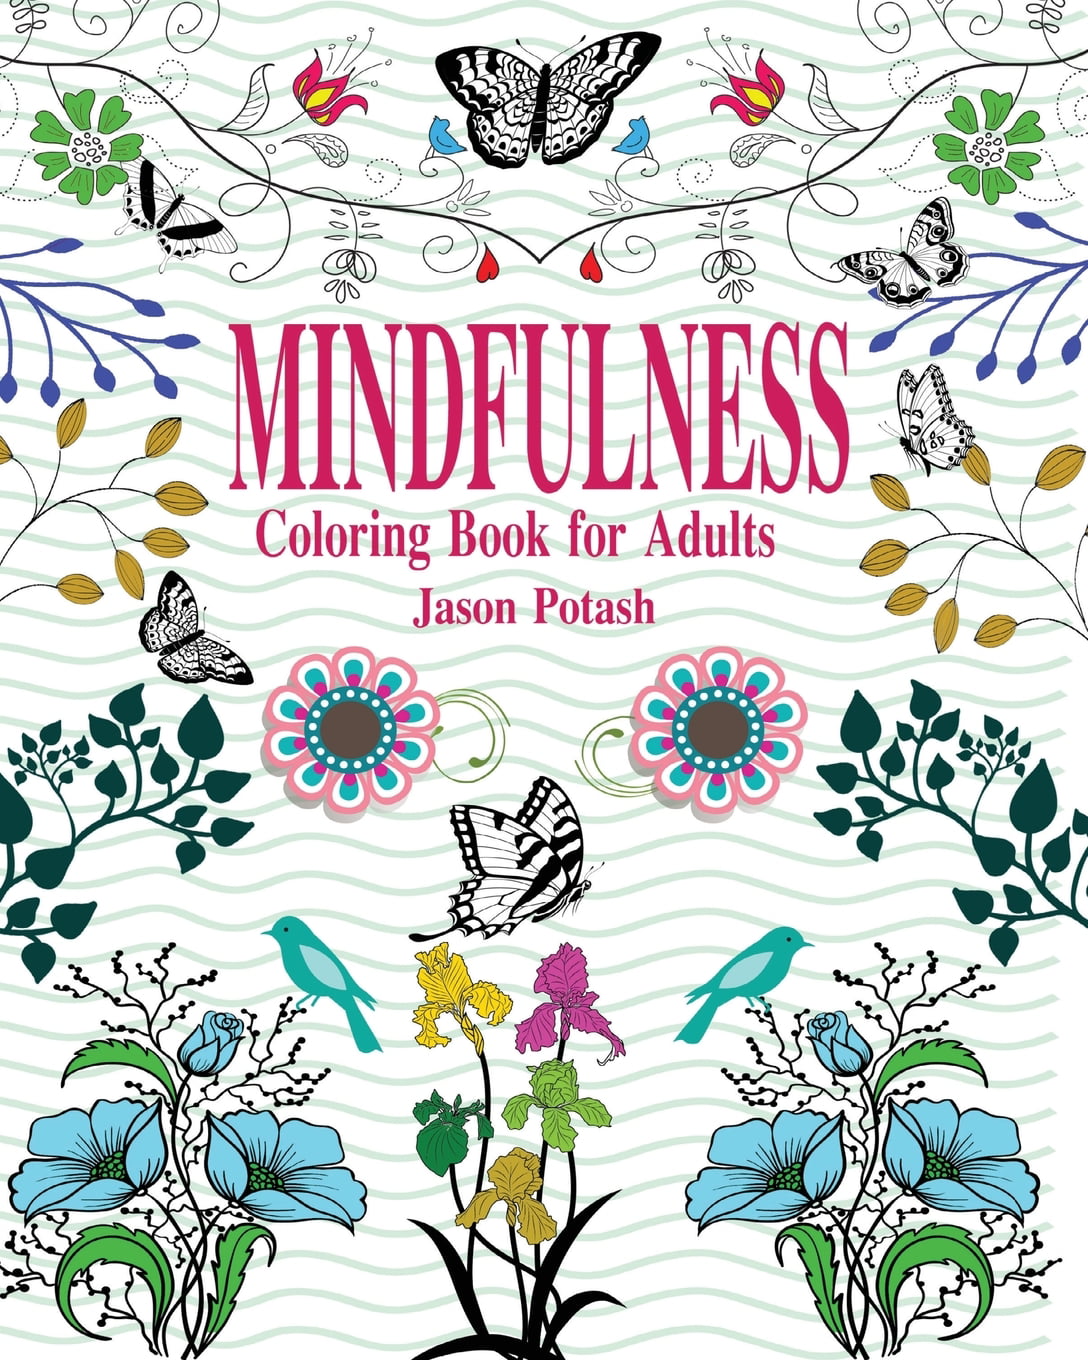 Download Mindfulness Coloring Book for Adults - Walmart.com